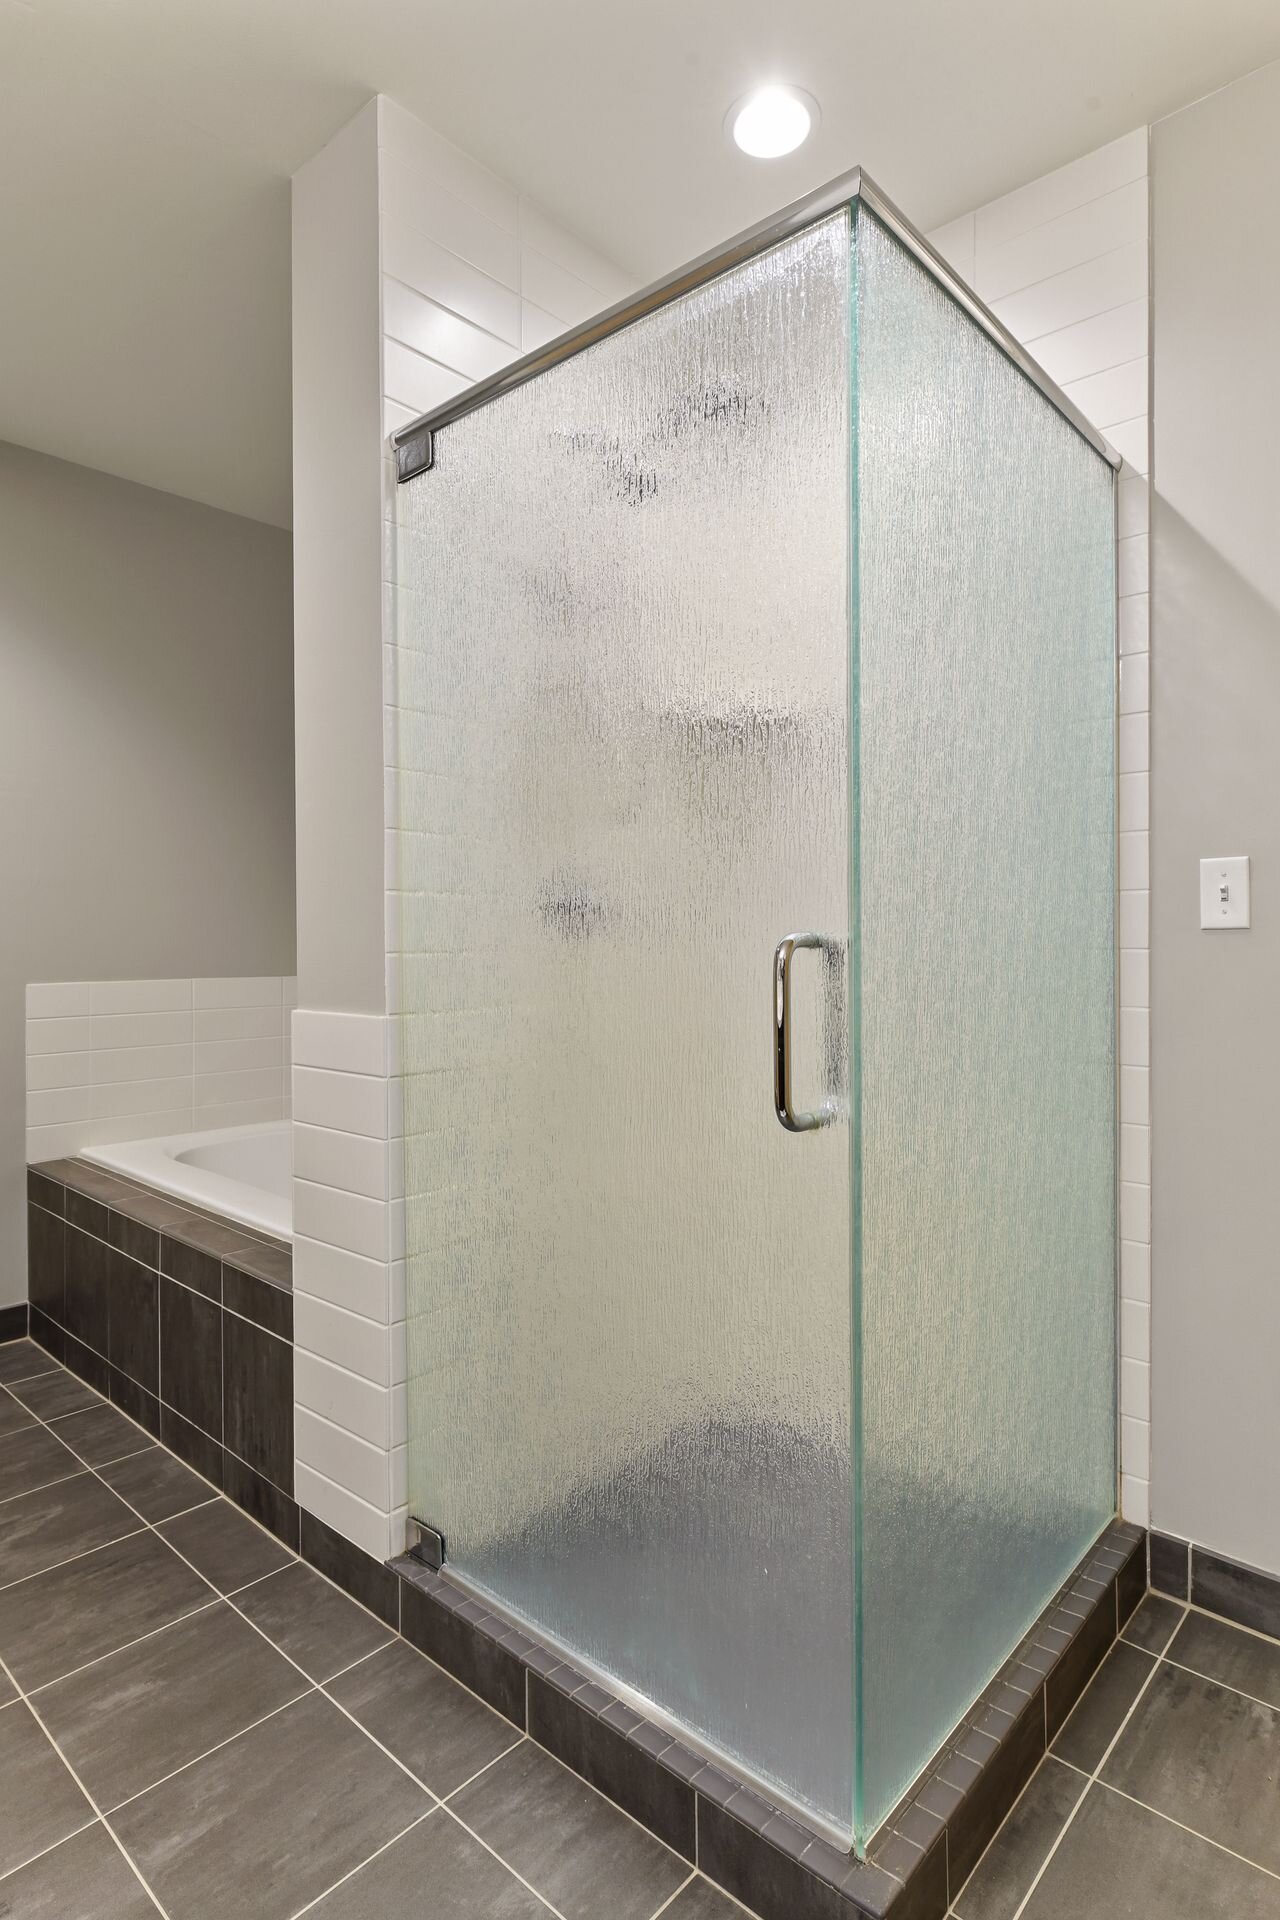 21 Shower and Seperate Tub in Master Bath.jpg